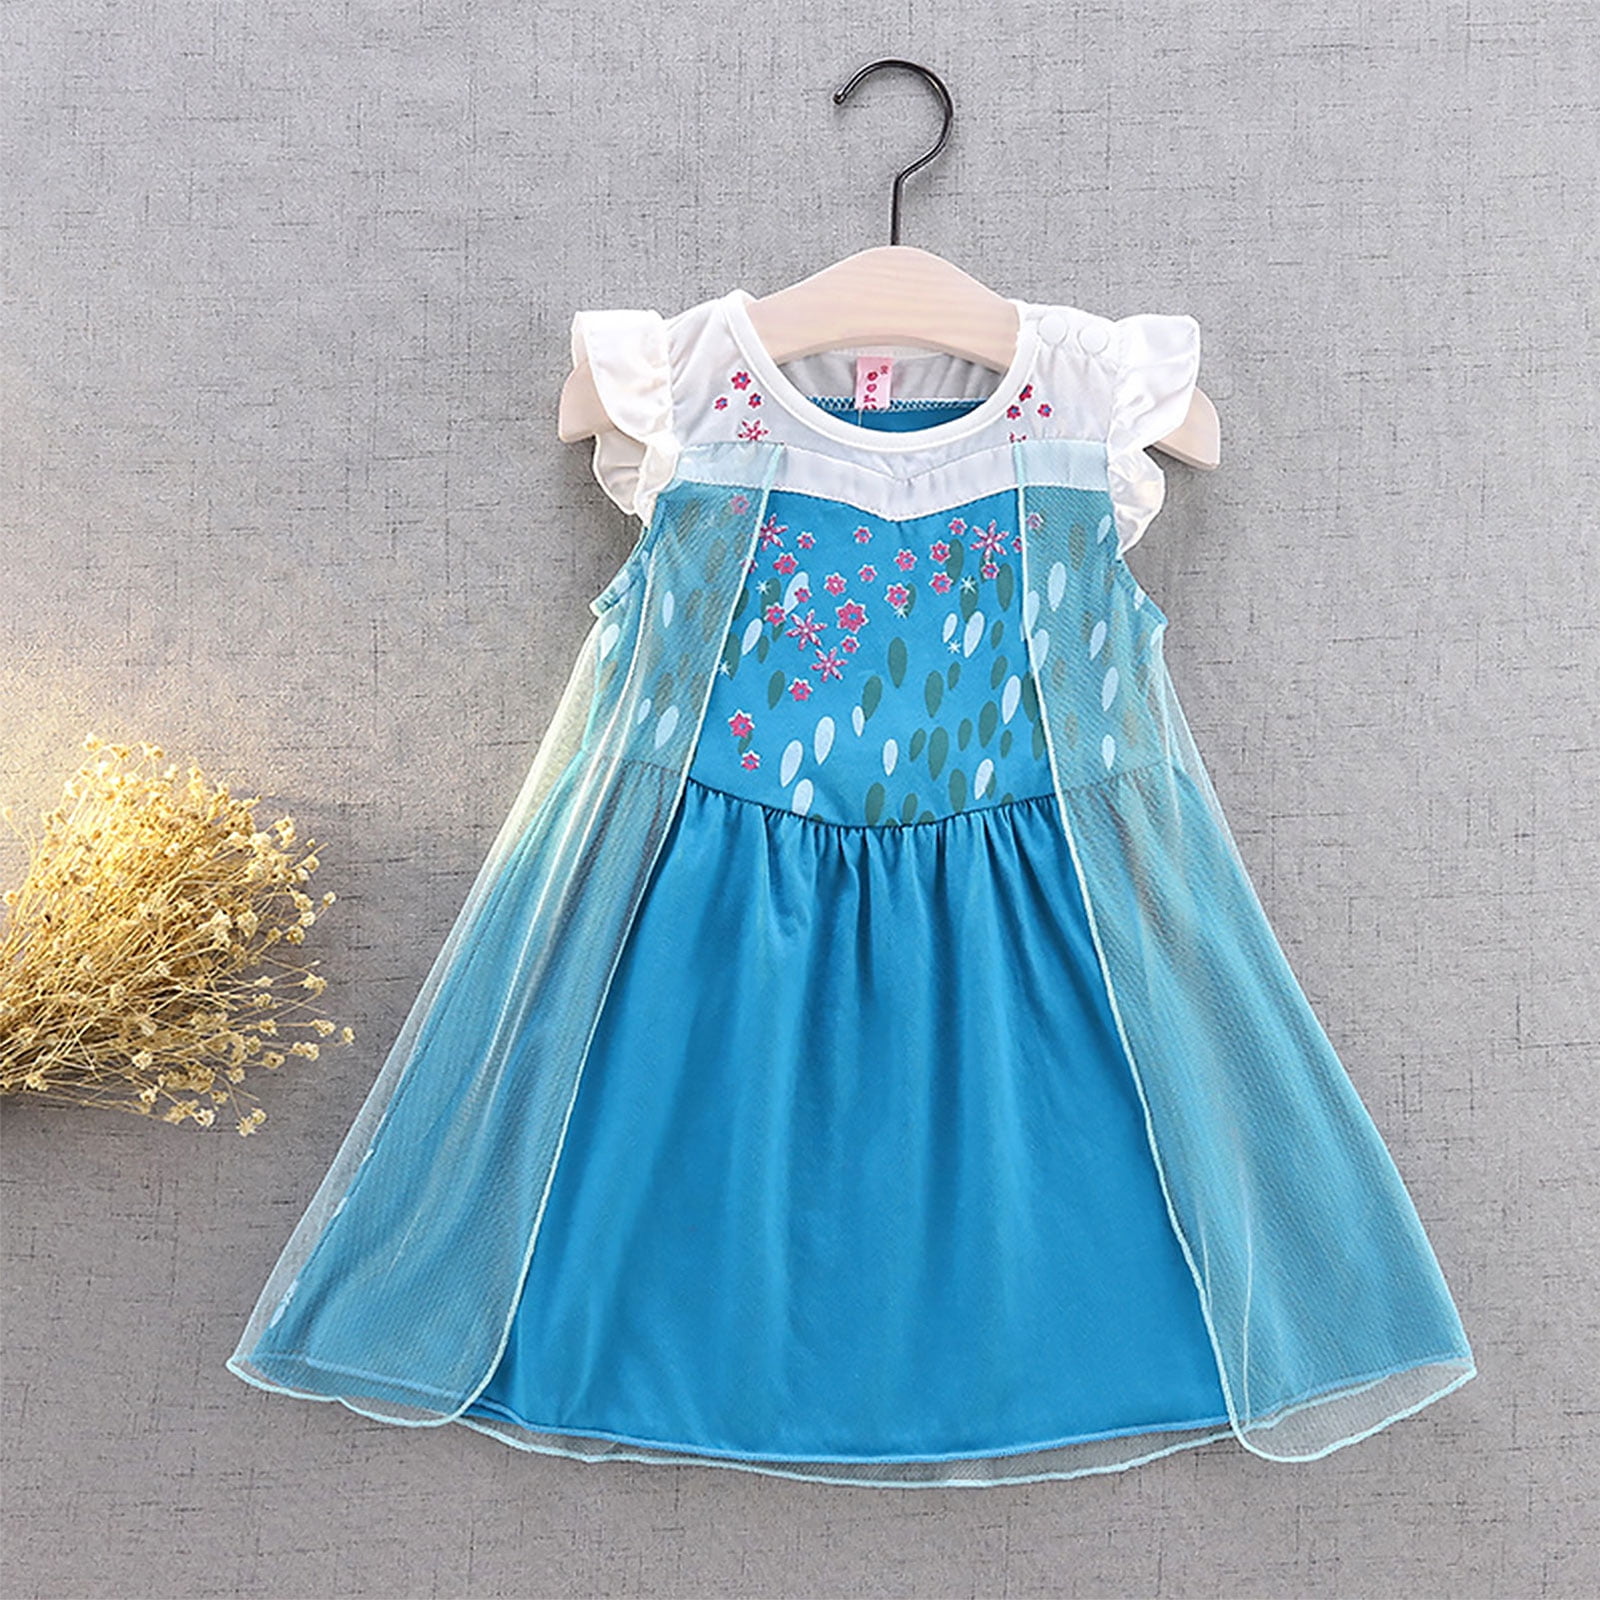 HenzWorld Little Girls Dresses Outfits Costume Snow Princess Birthday Party Halloween Cosplay Role Pretend Sequins 2-8 Years